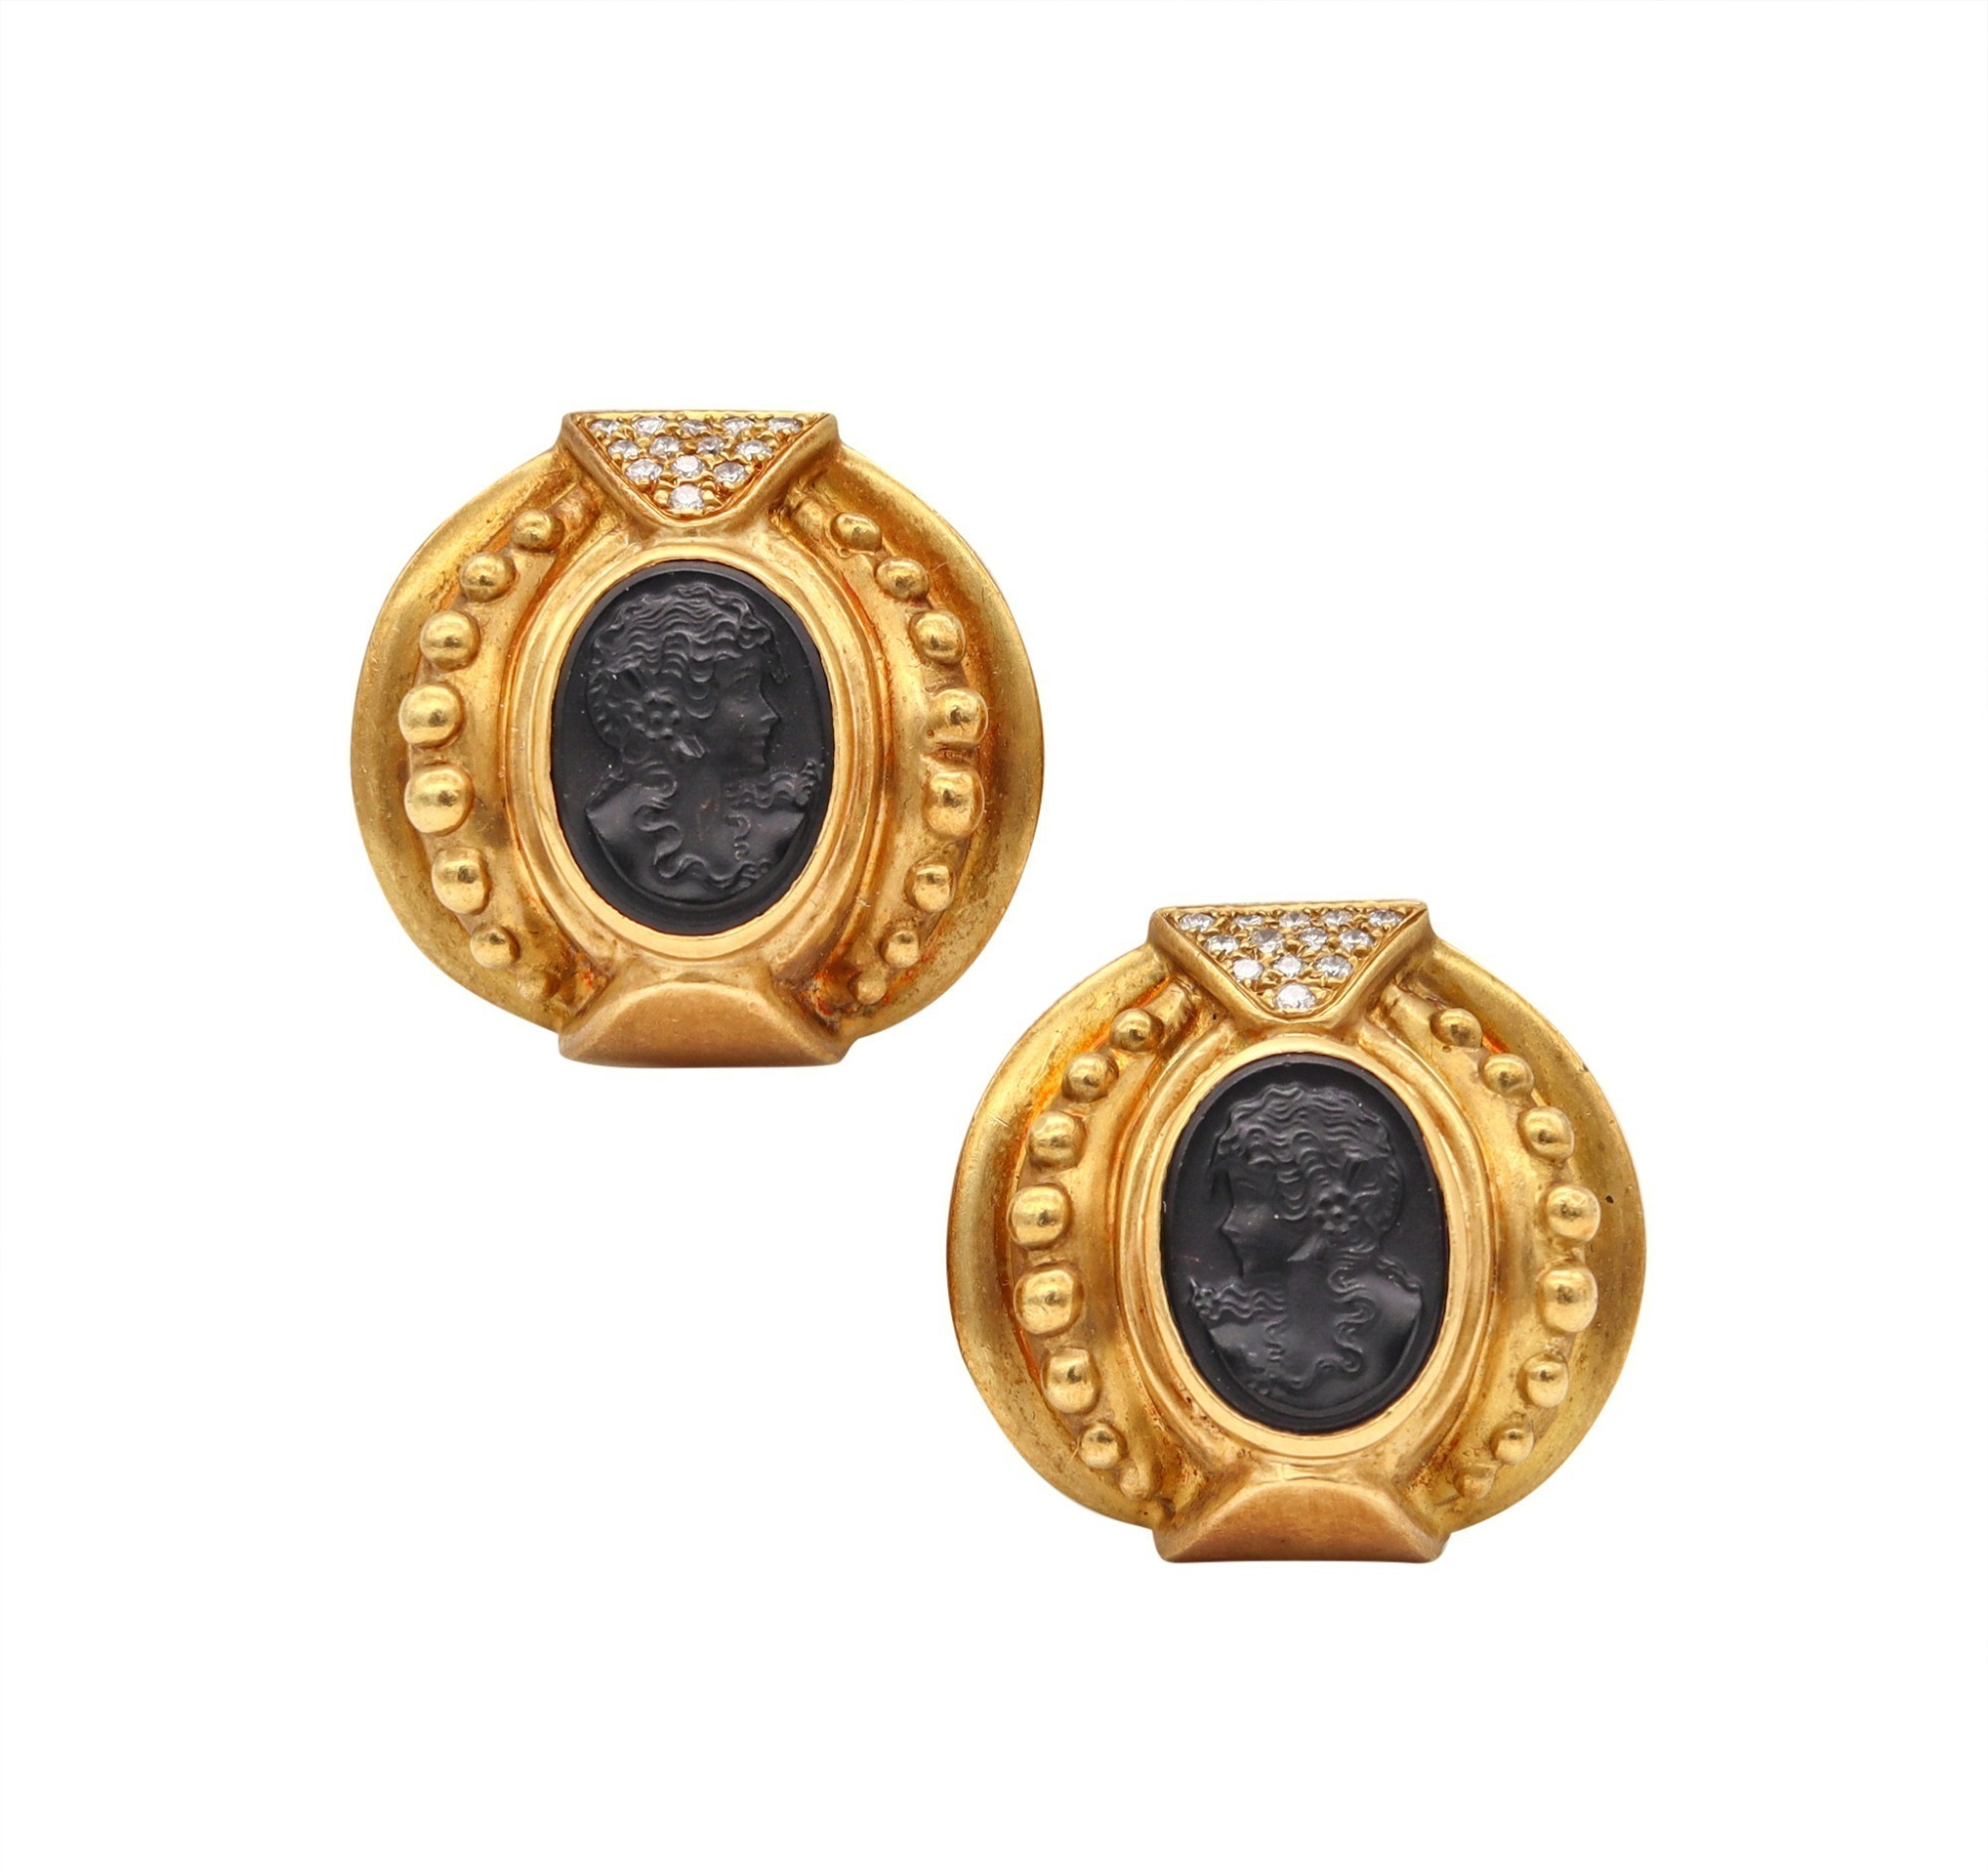 ETRUSCAN REVIVAL STYLE 18K GOLD EARRINGS WITH DIAMONDS AND ONYX CAMEOS